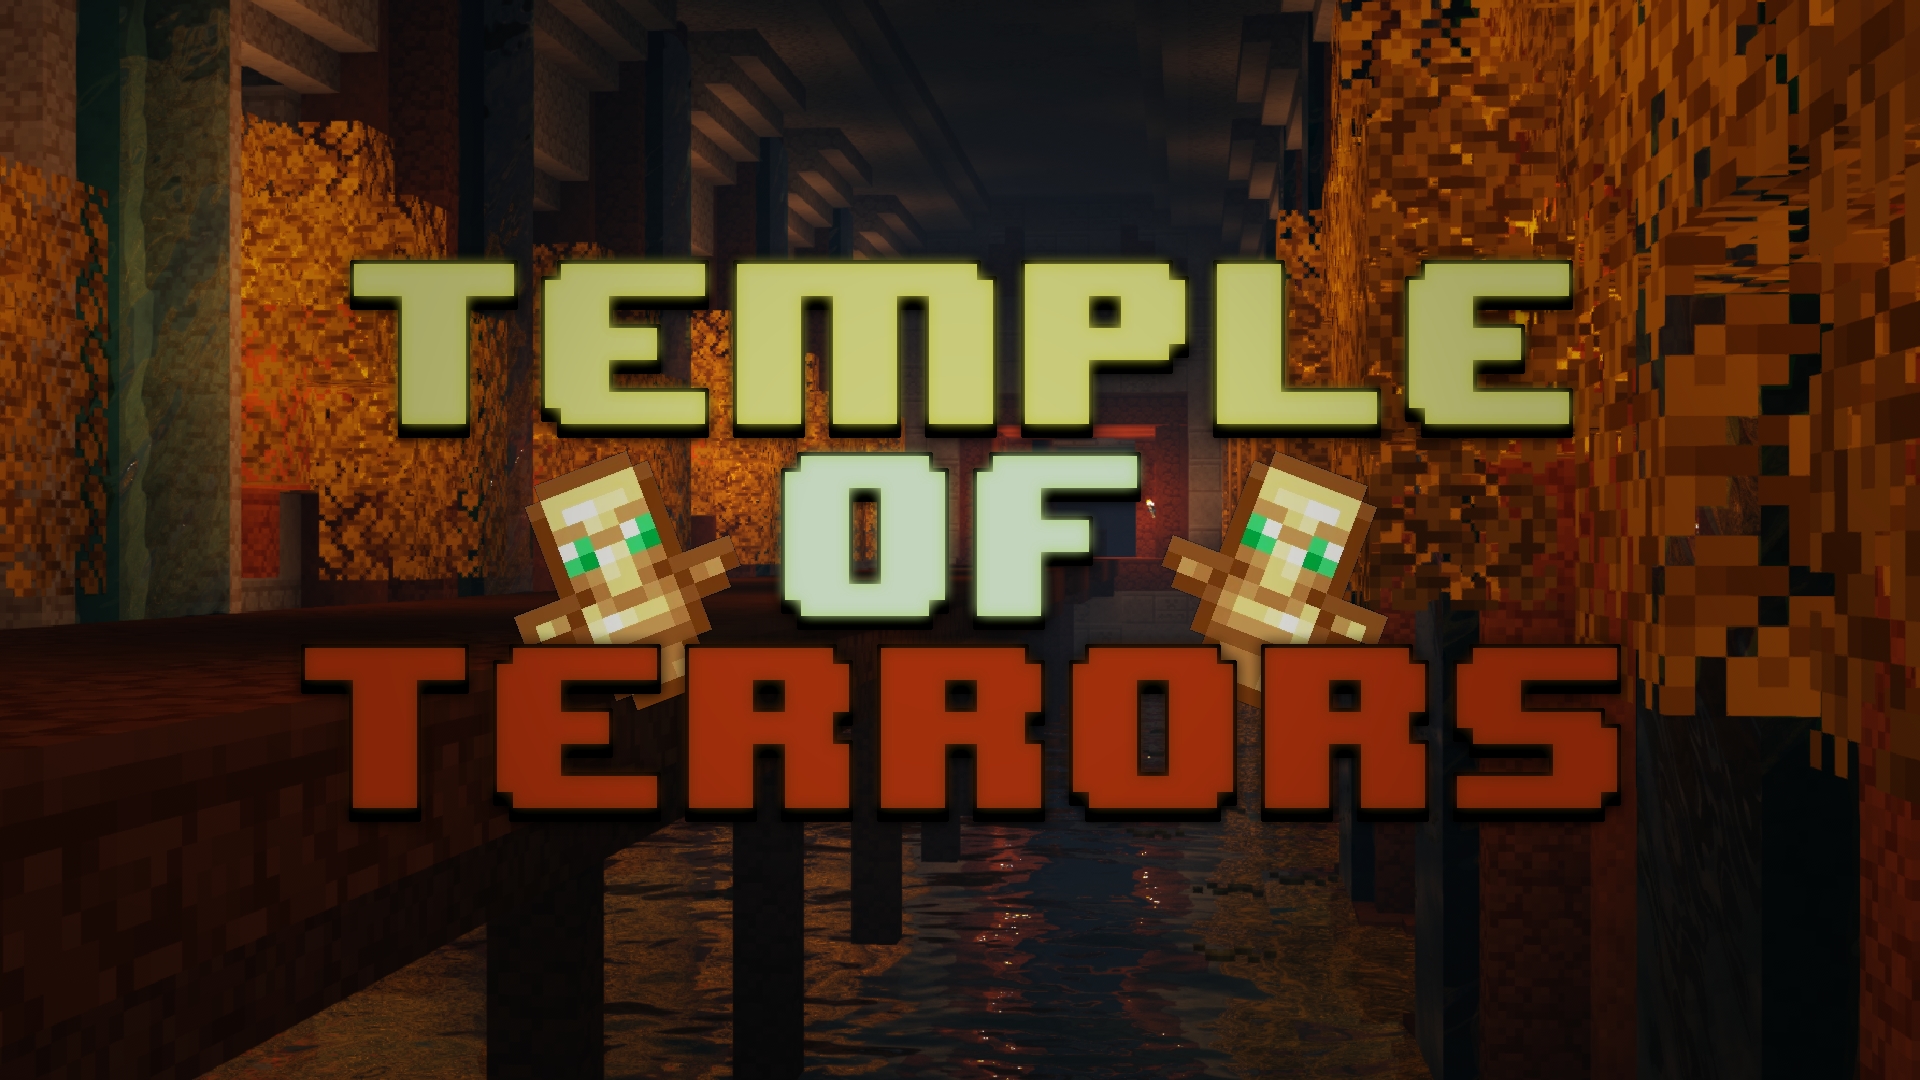 Temple of Terrors